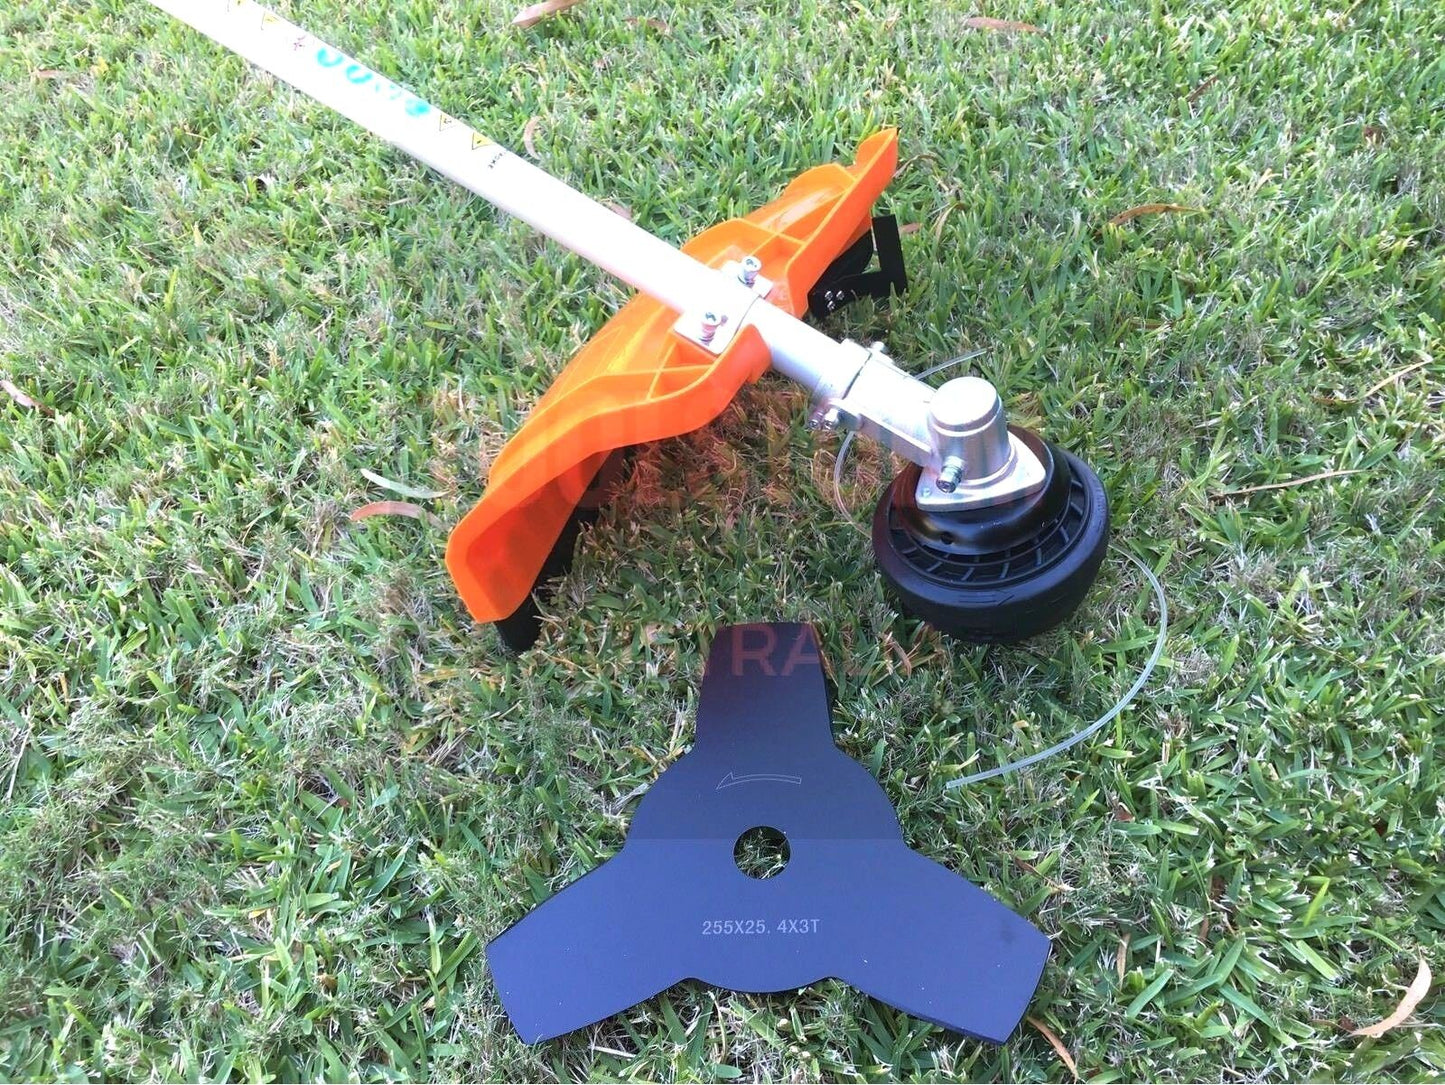 String Trimmer Brush Cutter Fit Baumr-AG MTM Multi Tools Chainsaw Hedge Saw